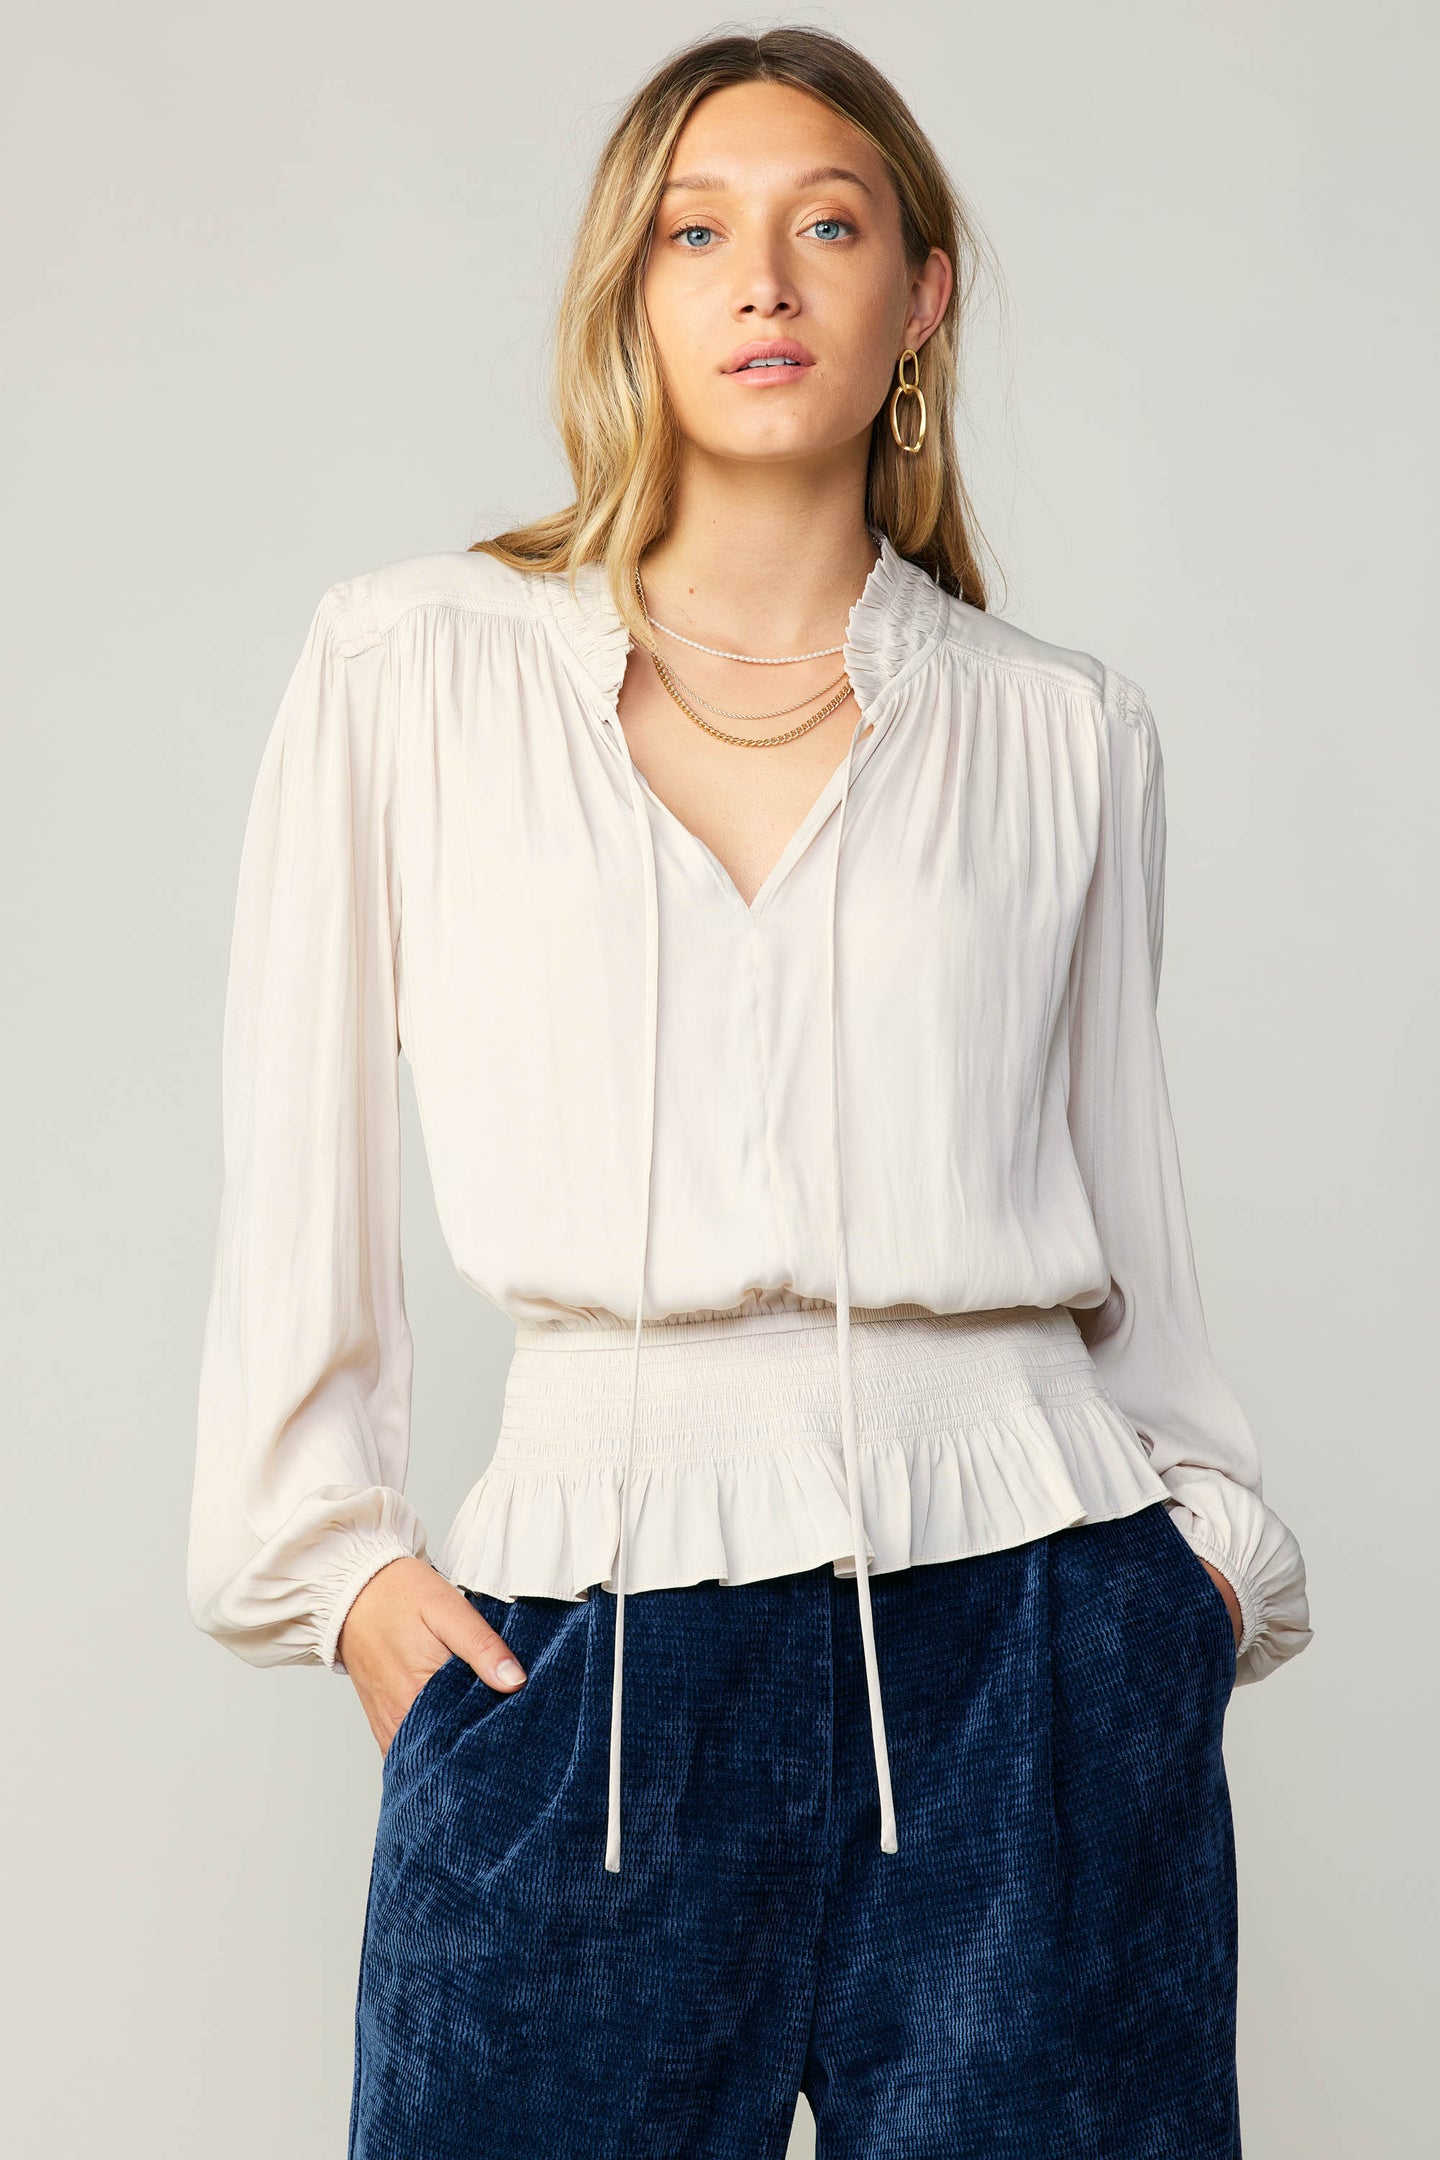 Peplum Collared Blouse – CURRENT AIR